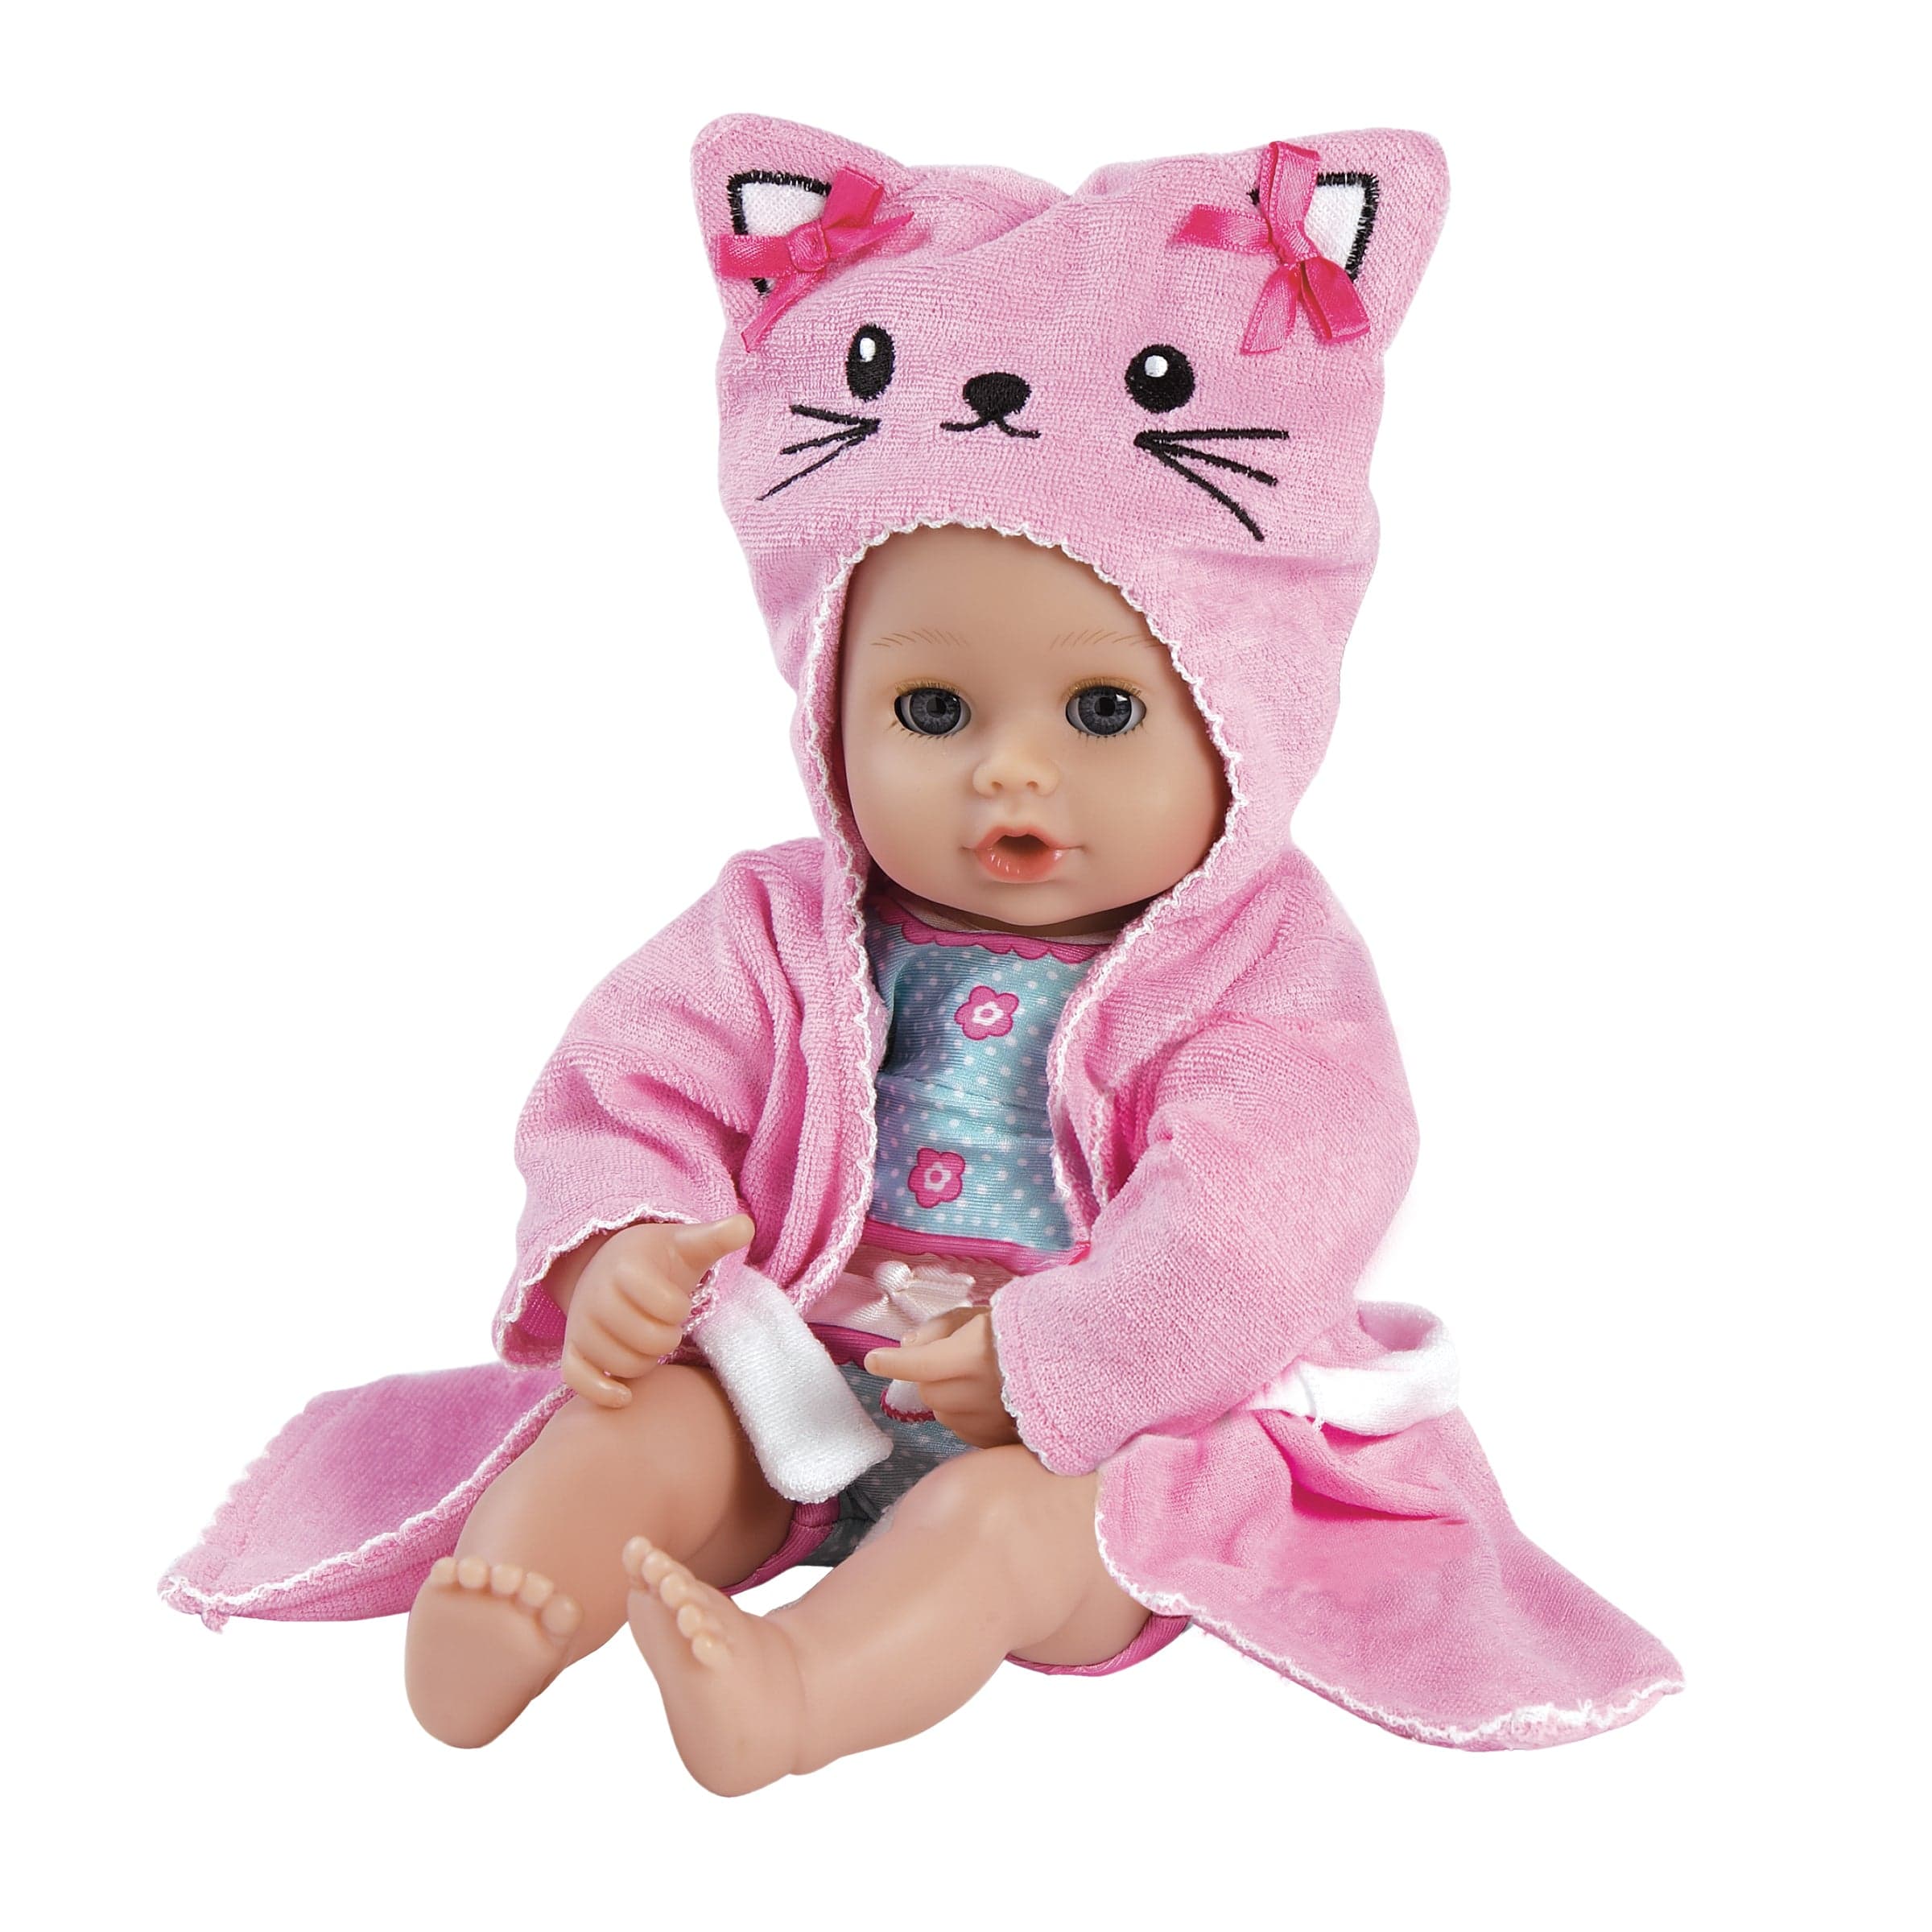 Adora BathTime Kitty Baby Doll, Doll Clothes & Accessories Set